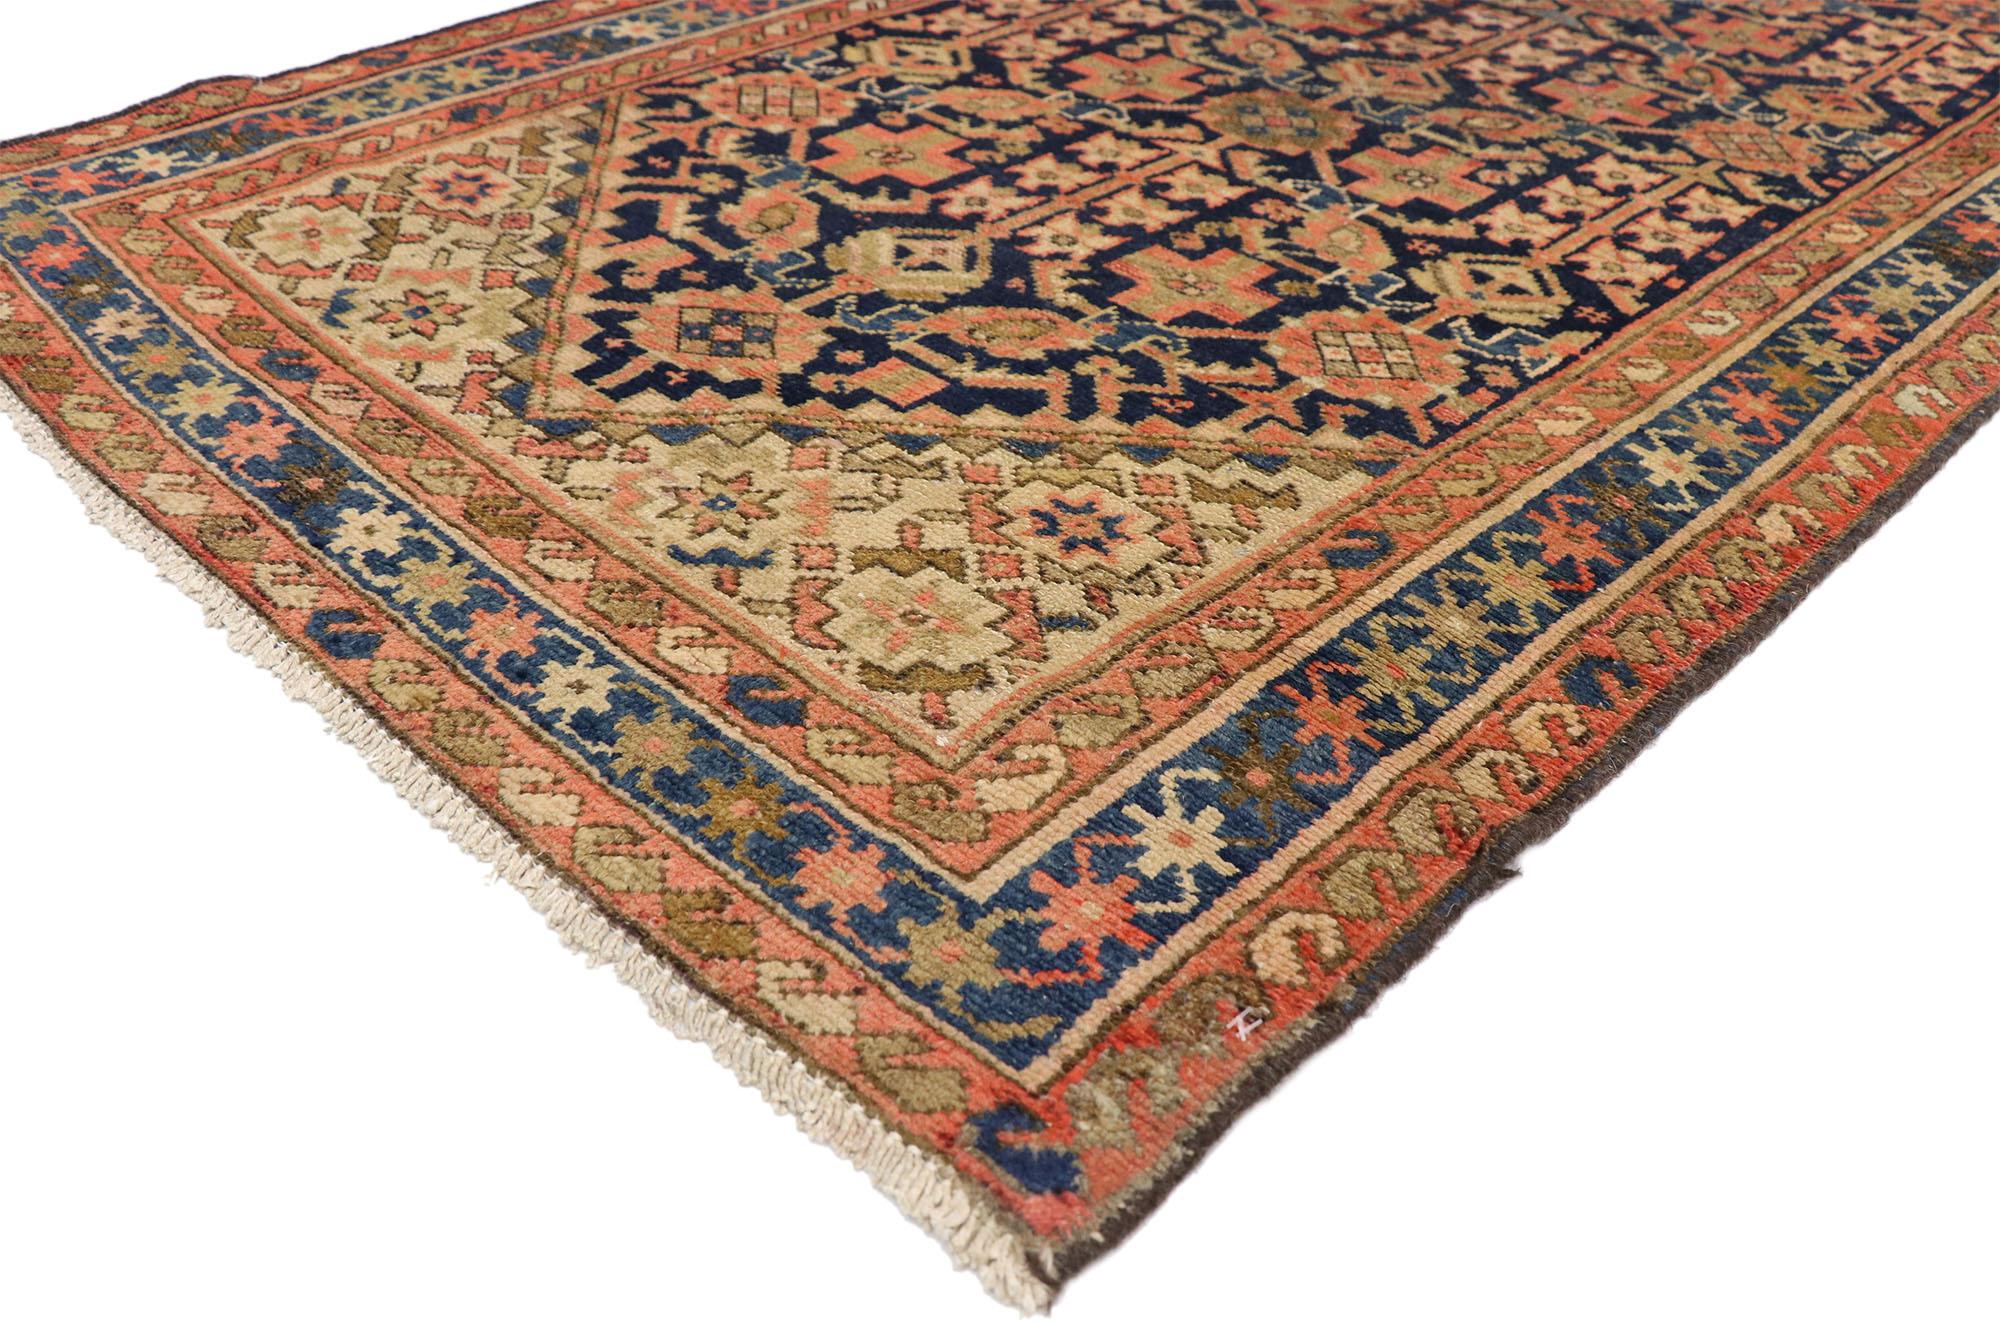 75362 Antique Persian Malayer Runner 03'03 X 13'00. This hand knotted wool antique Persian Malayer runner features a lively all-over floral lattice pattern composed of Mina Khani design and Guli Henna which is the Flower of Hinnai also known as Guli